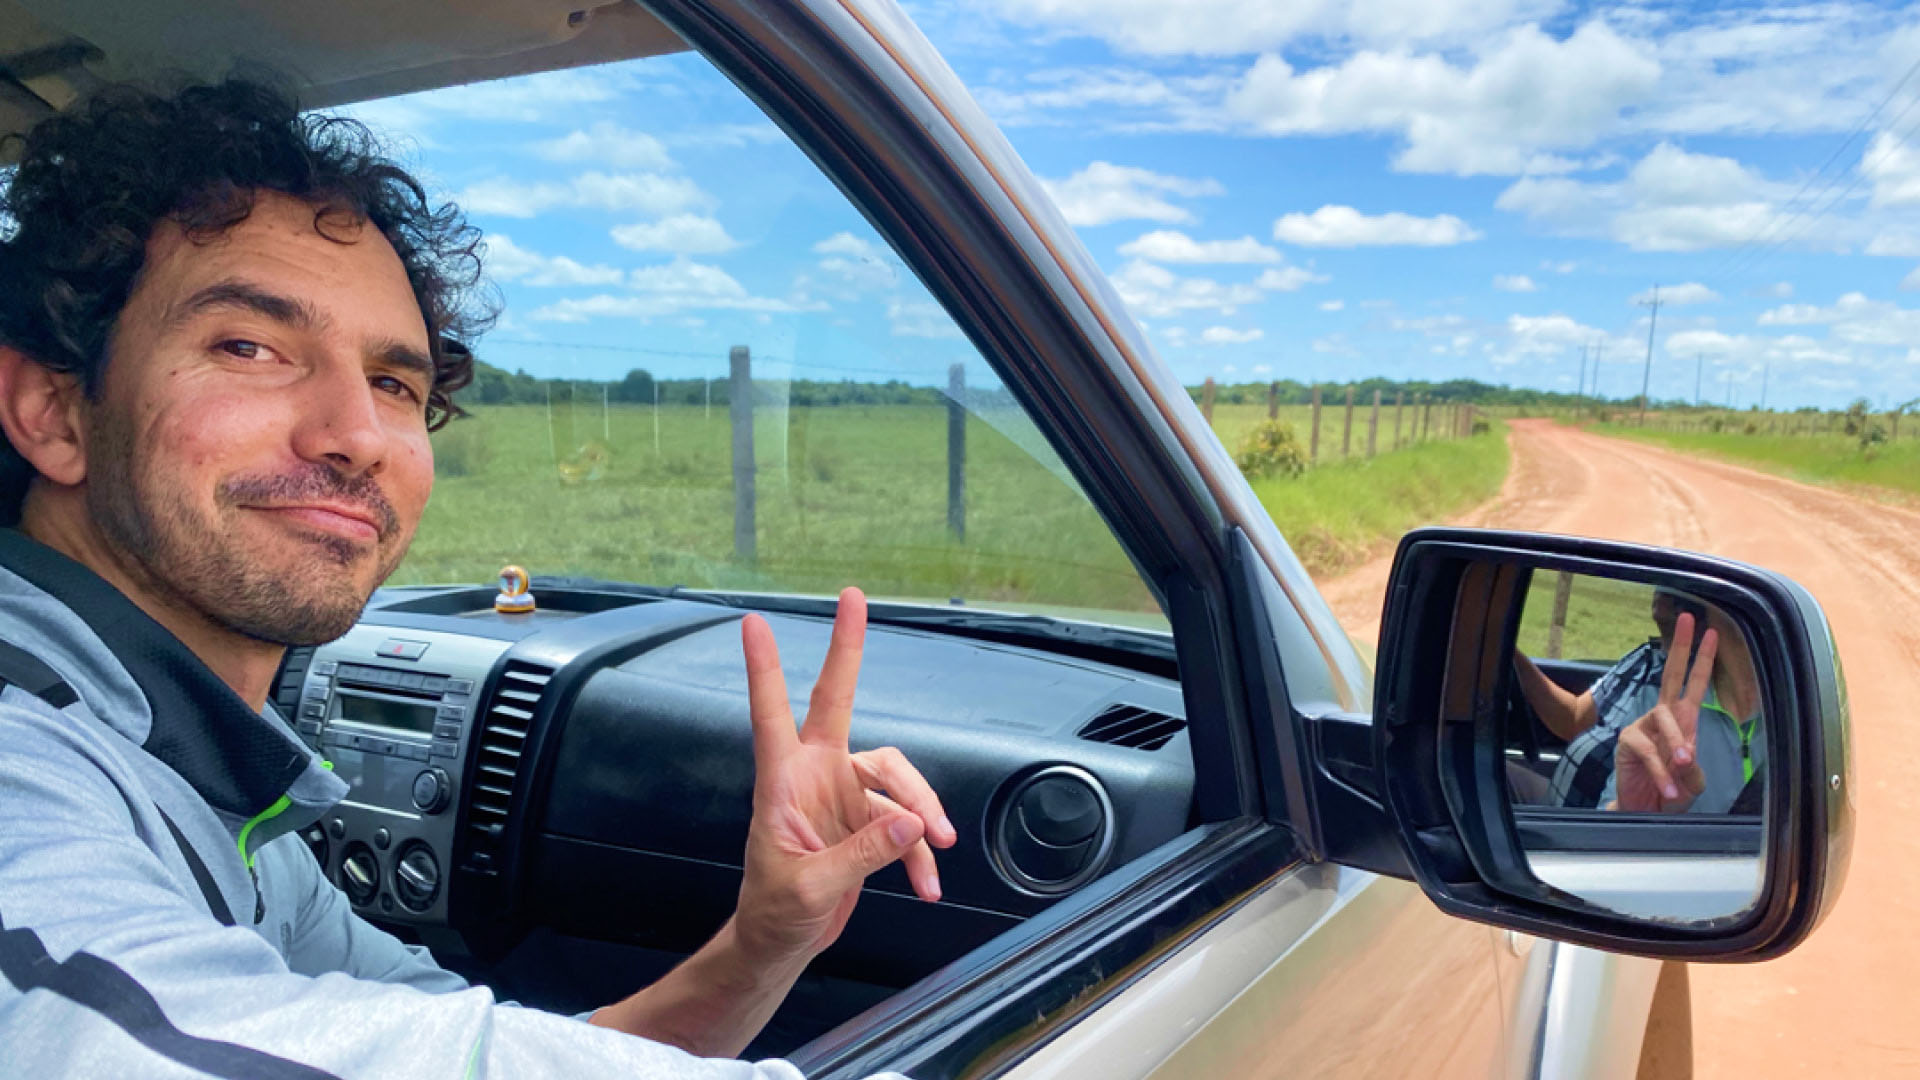 Carlos smirking out of the passenger side window of a silver car, holding his hands up in a peace sign